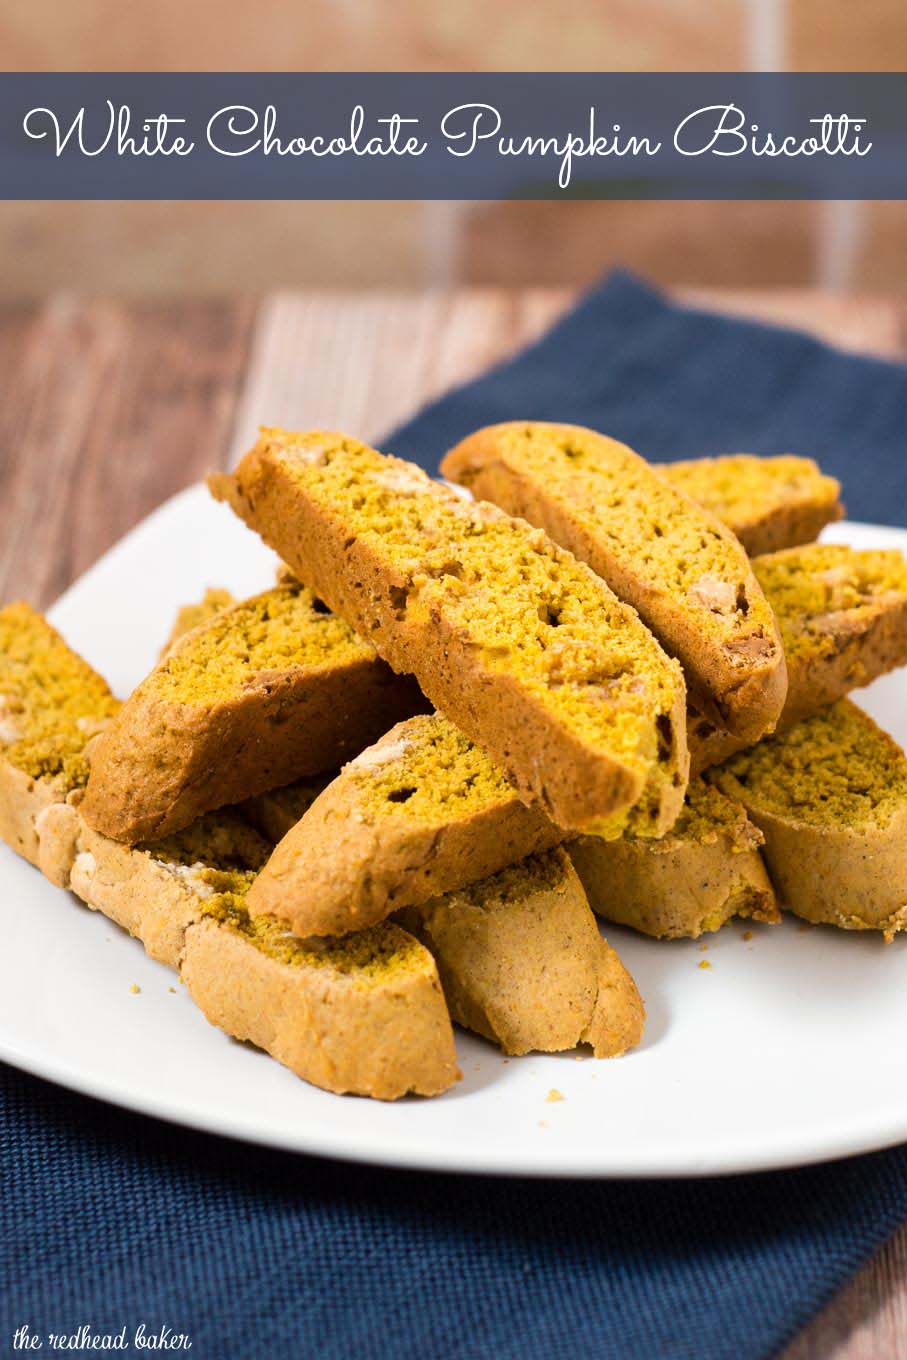 Pumpkin biscotti is a little more tender than traditional Italian biscotti. Pair with a warm cup of coffee for brunch or a light snack. #PumpkinWeek